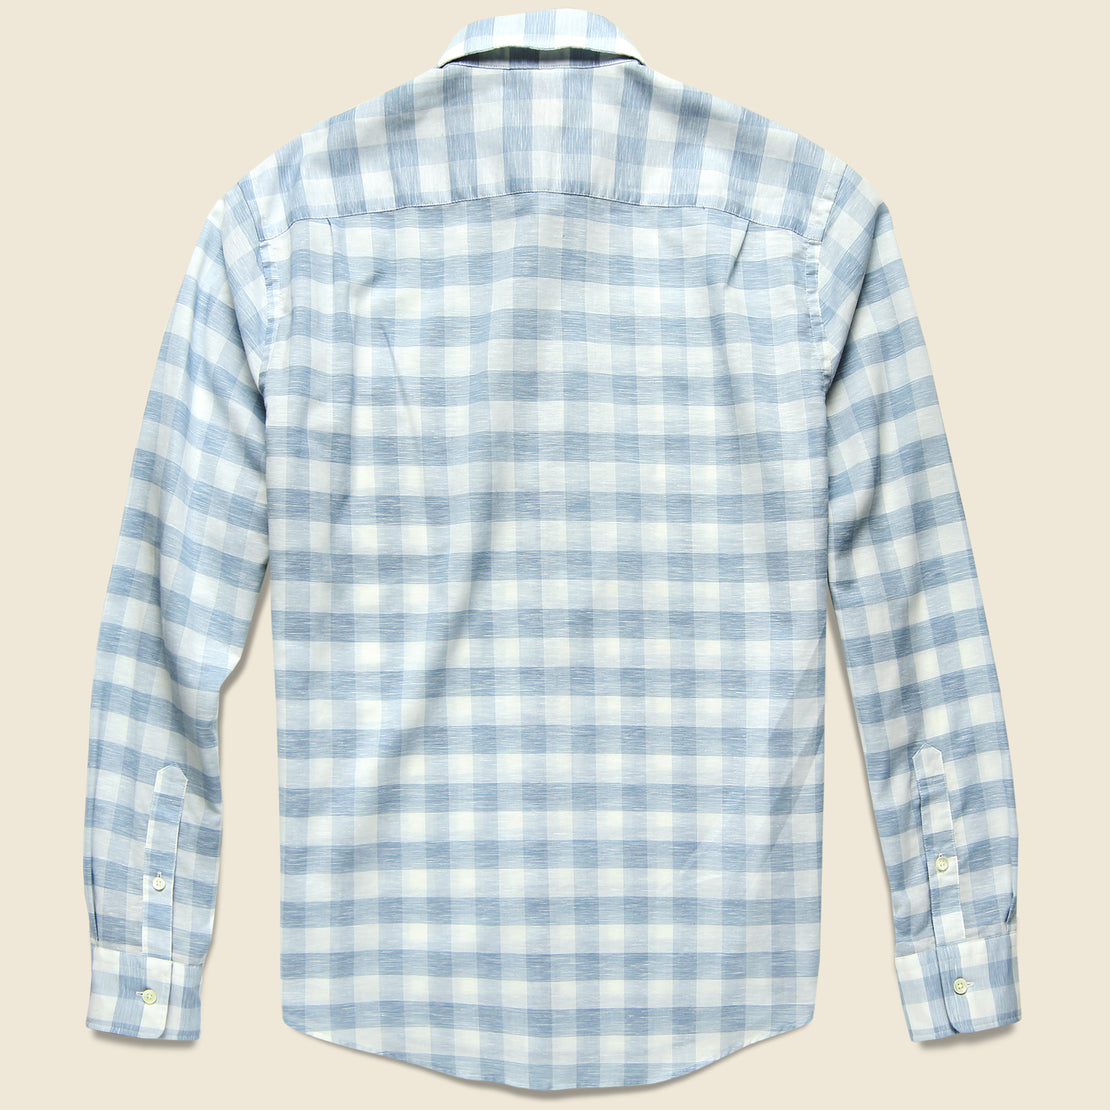 Stretch Summer Blend Shirt - White Blue Buffalo - Faherty - STAG Provisions - Tops - L/S Woven - Plaid